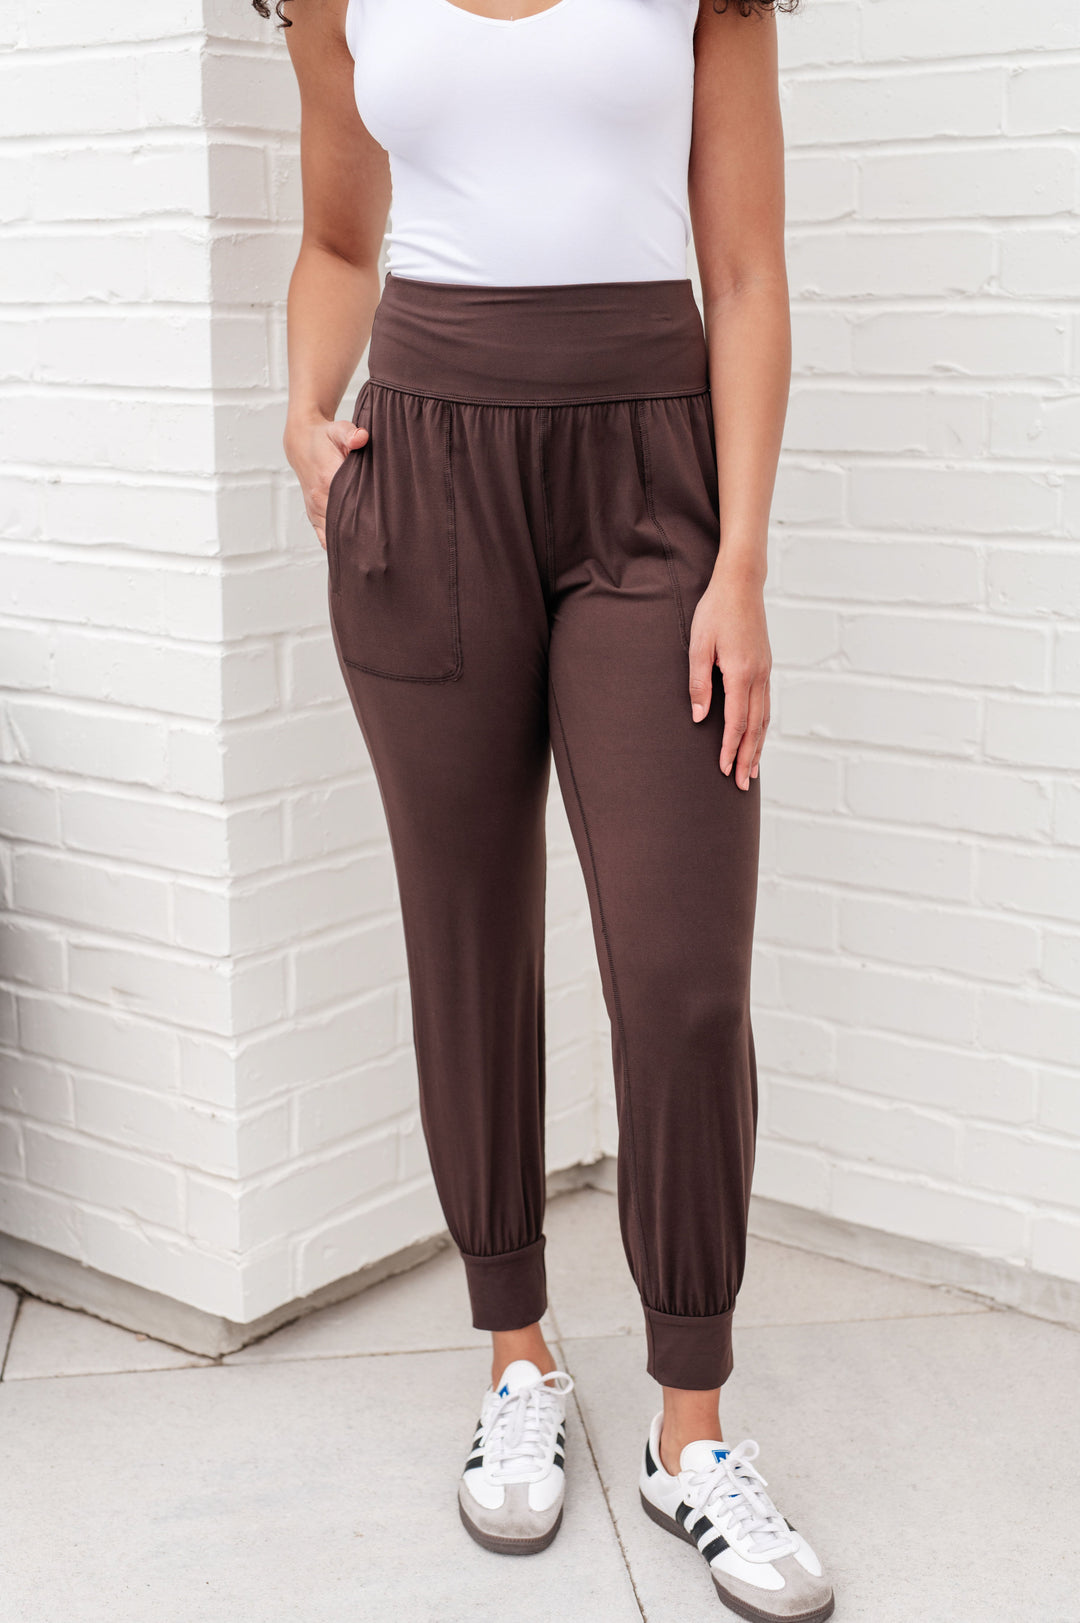 Always Accelerating Joggers in Espresso-Athleisure-Inspired by Justeen-Women's Clothing Boutique in Chicago, Illinois